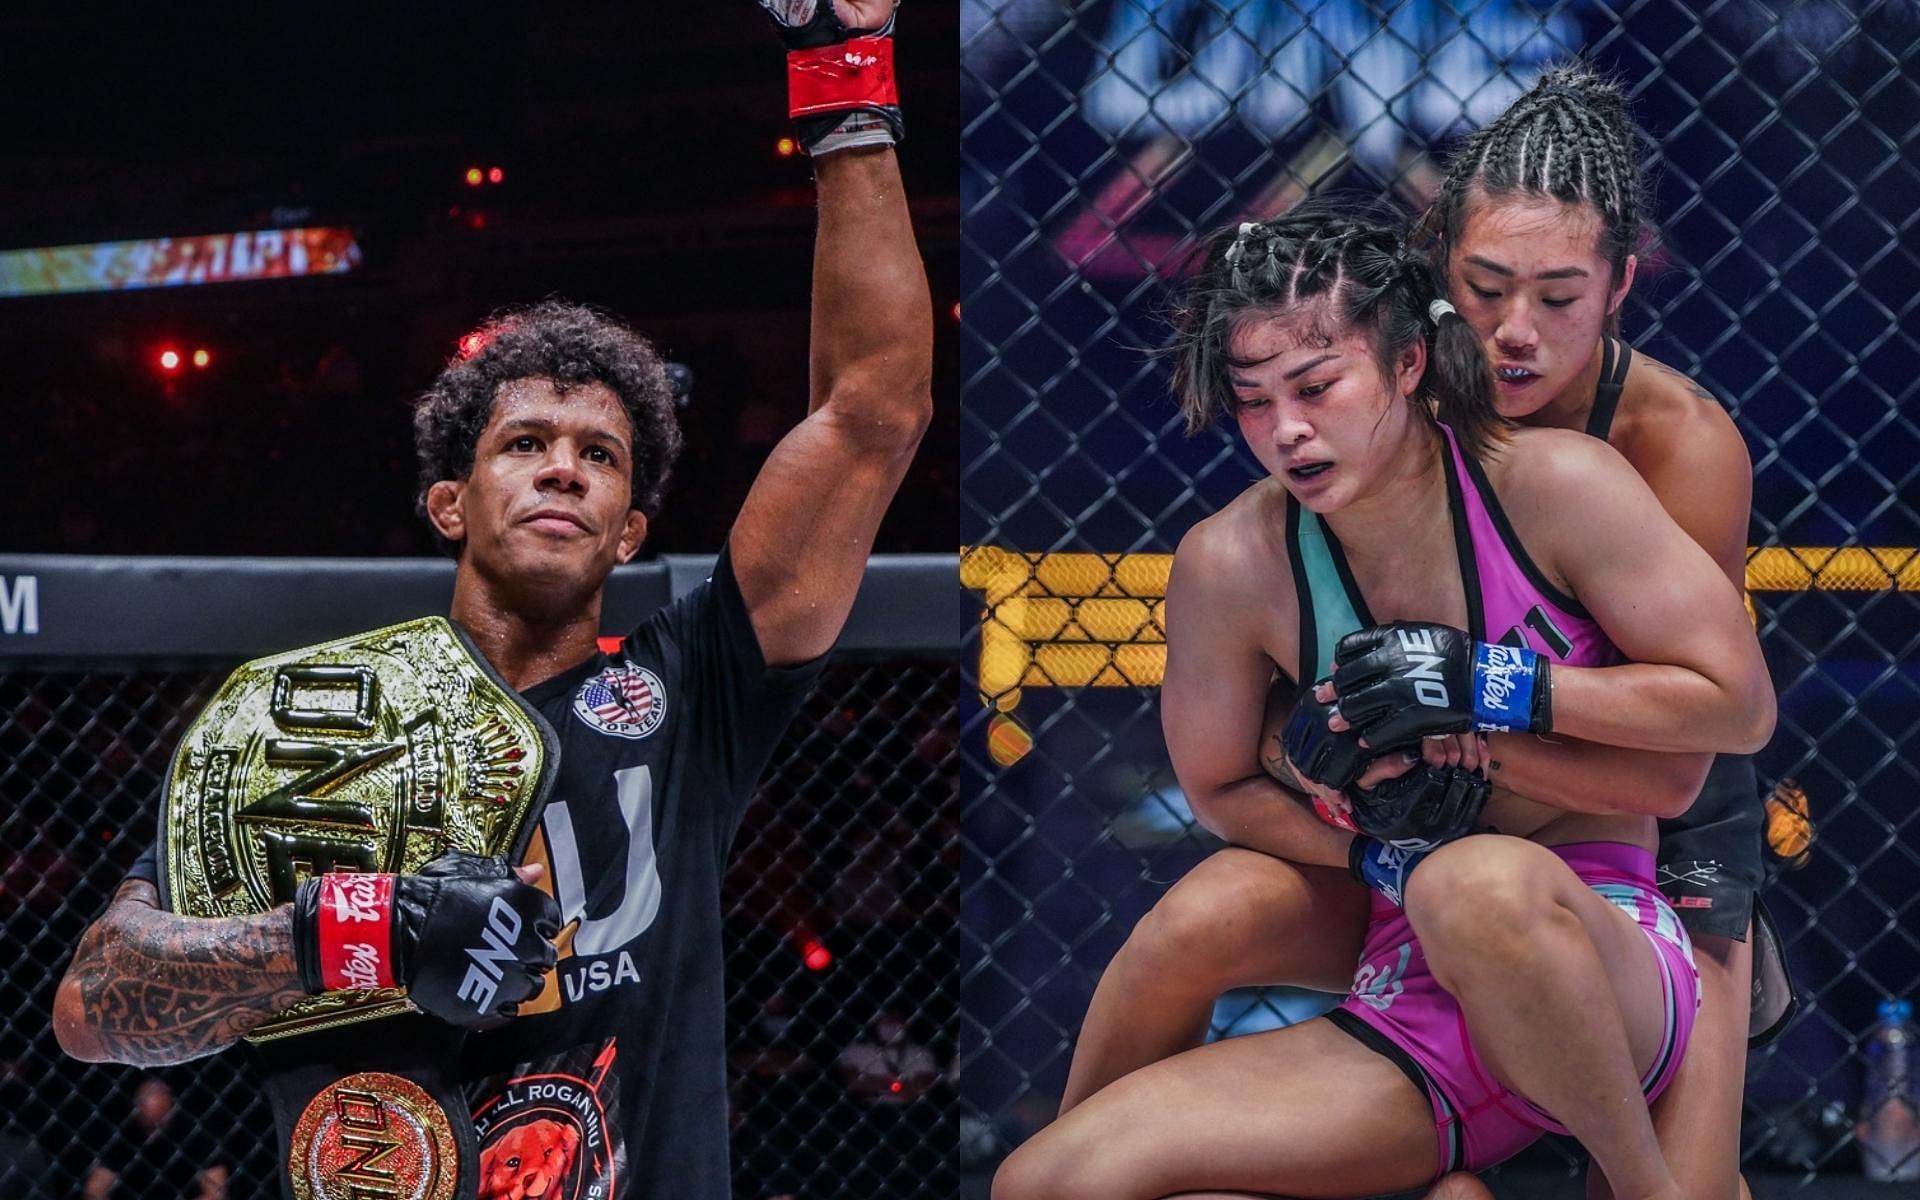 ONE flyweight champion Adriano Moraes (left) has some motivational words for Stamp Fairtex (right) after her loss to Angela Lee (far right) at ONE X. (Images courtesy of ONE Championship)